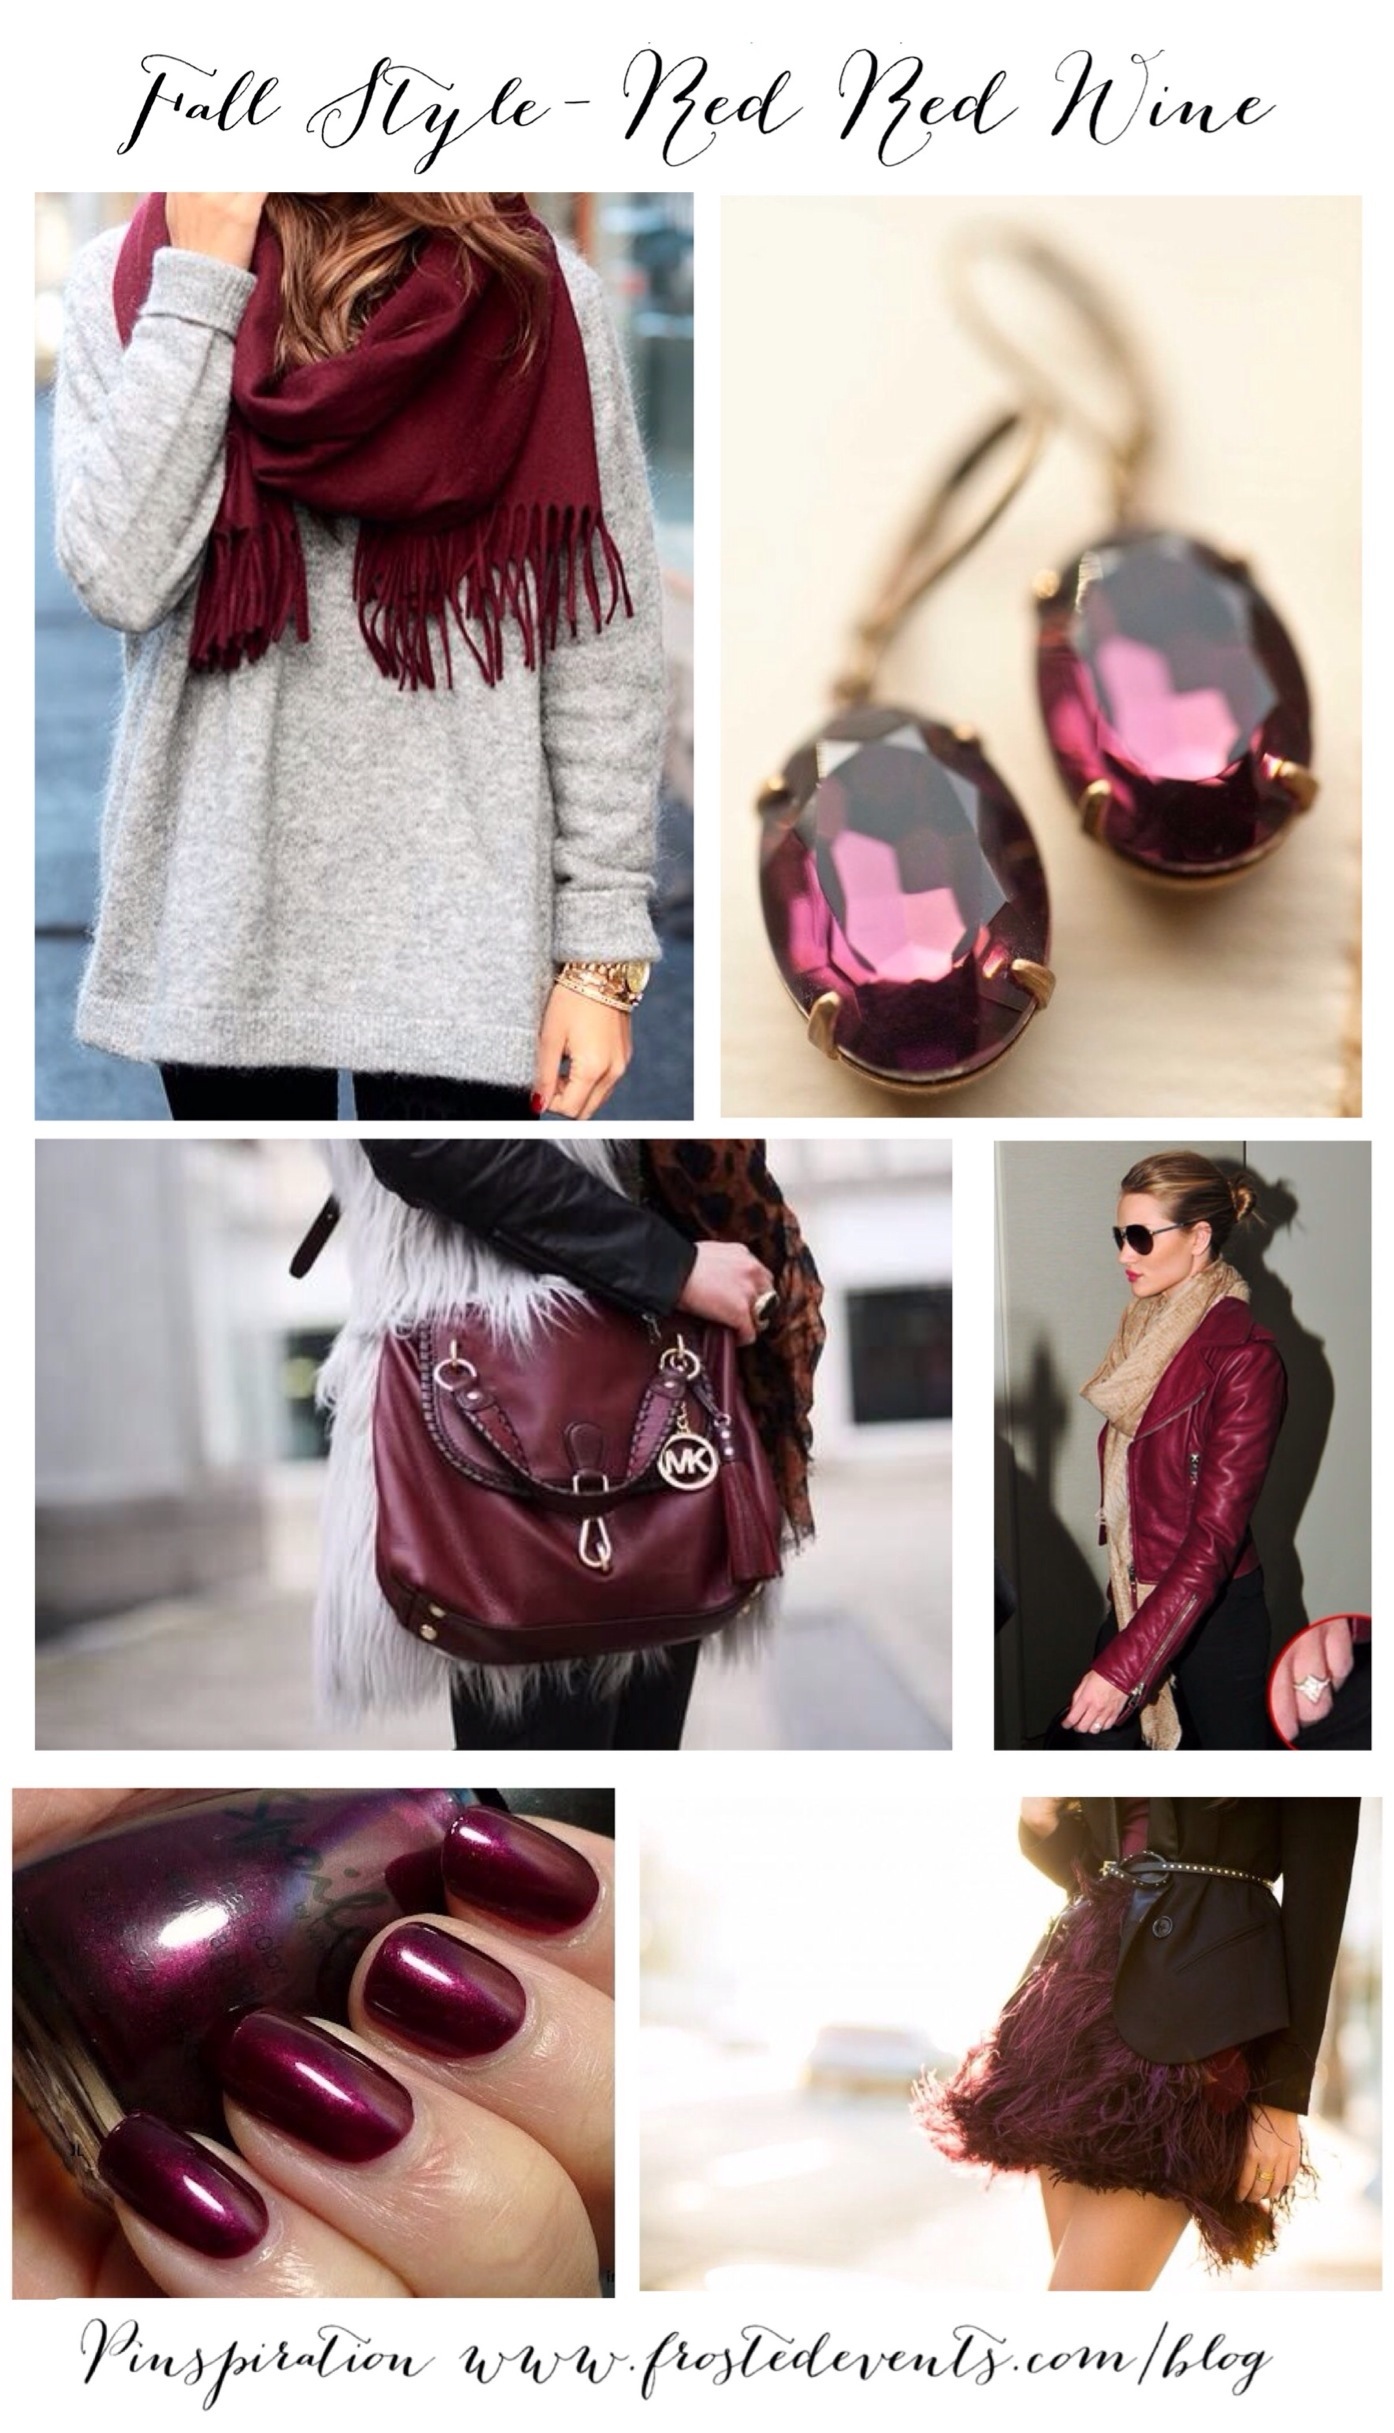 Fall Style Red Winde Burgunday Fashion Ideas & Inspiration www.frostedevents.com